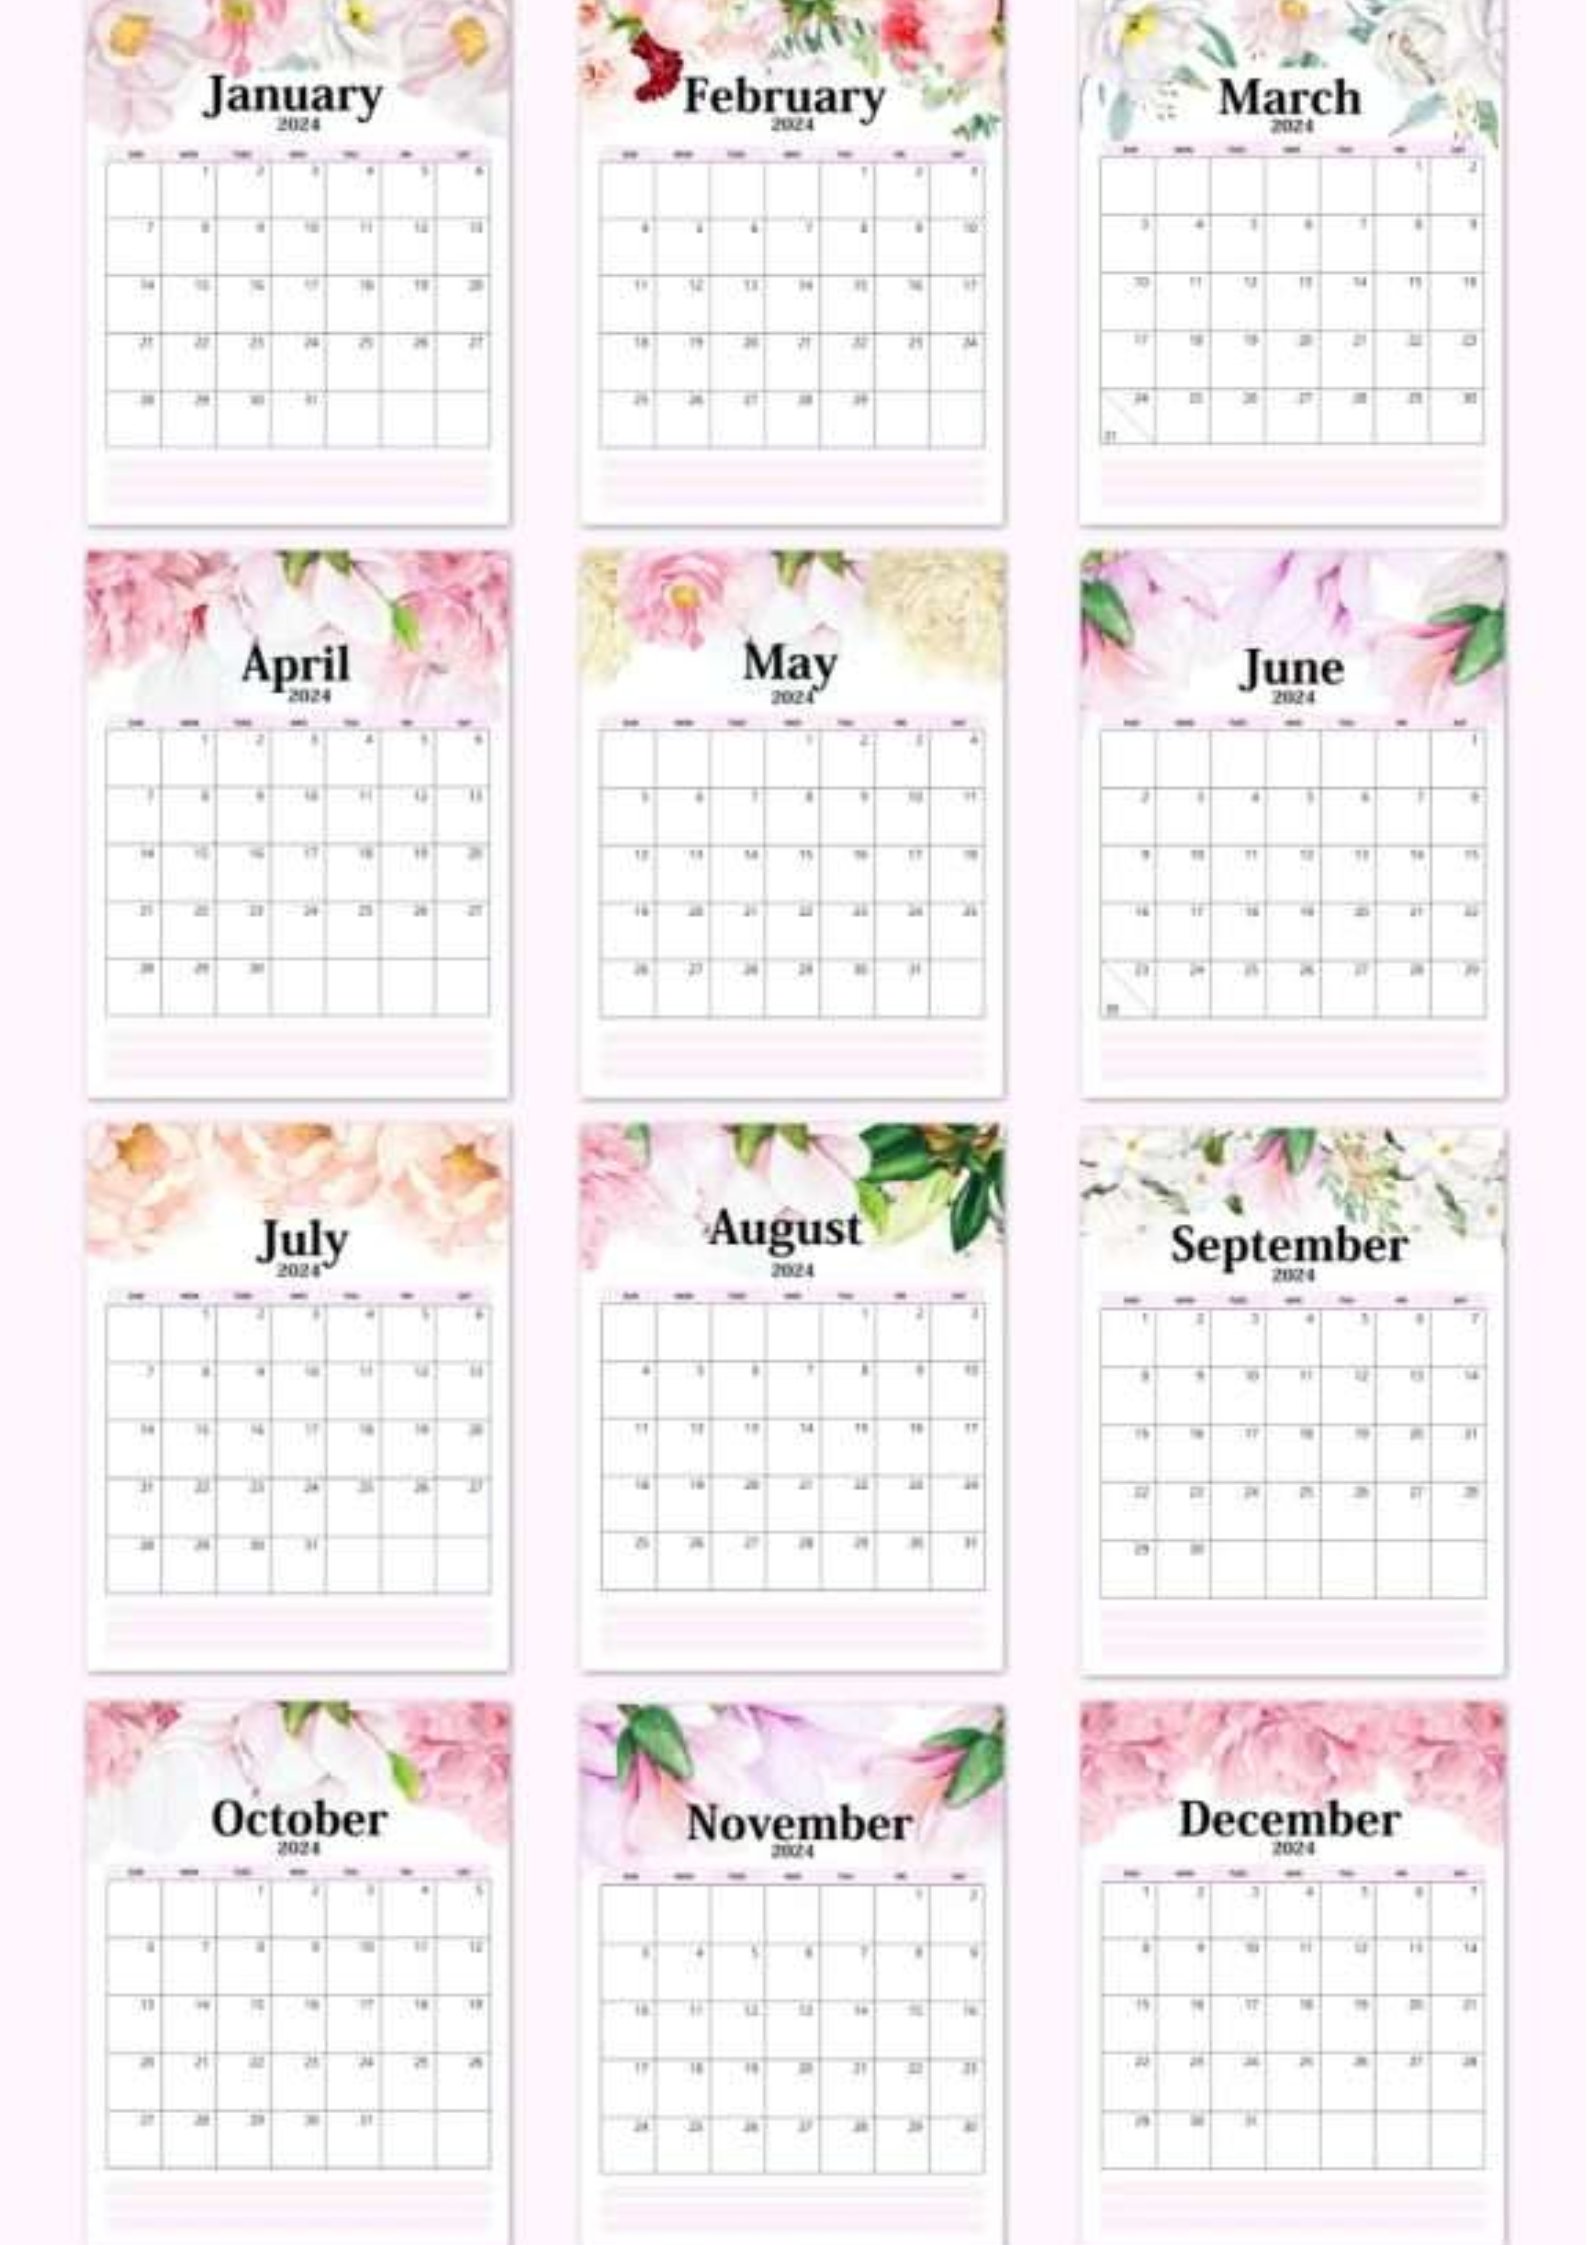 Free Printable 2024 Monthly Calendar with Holidays - Pretty Style!